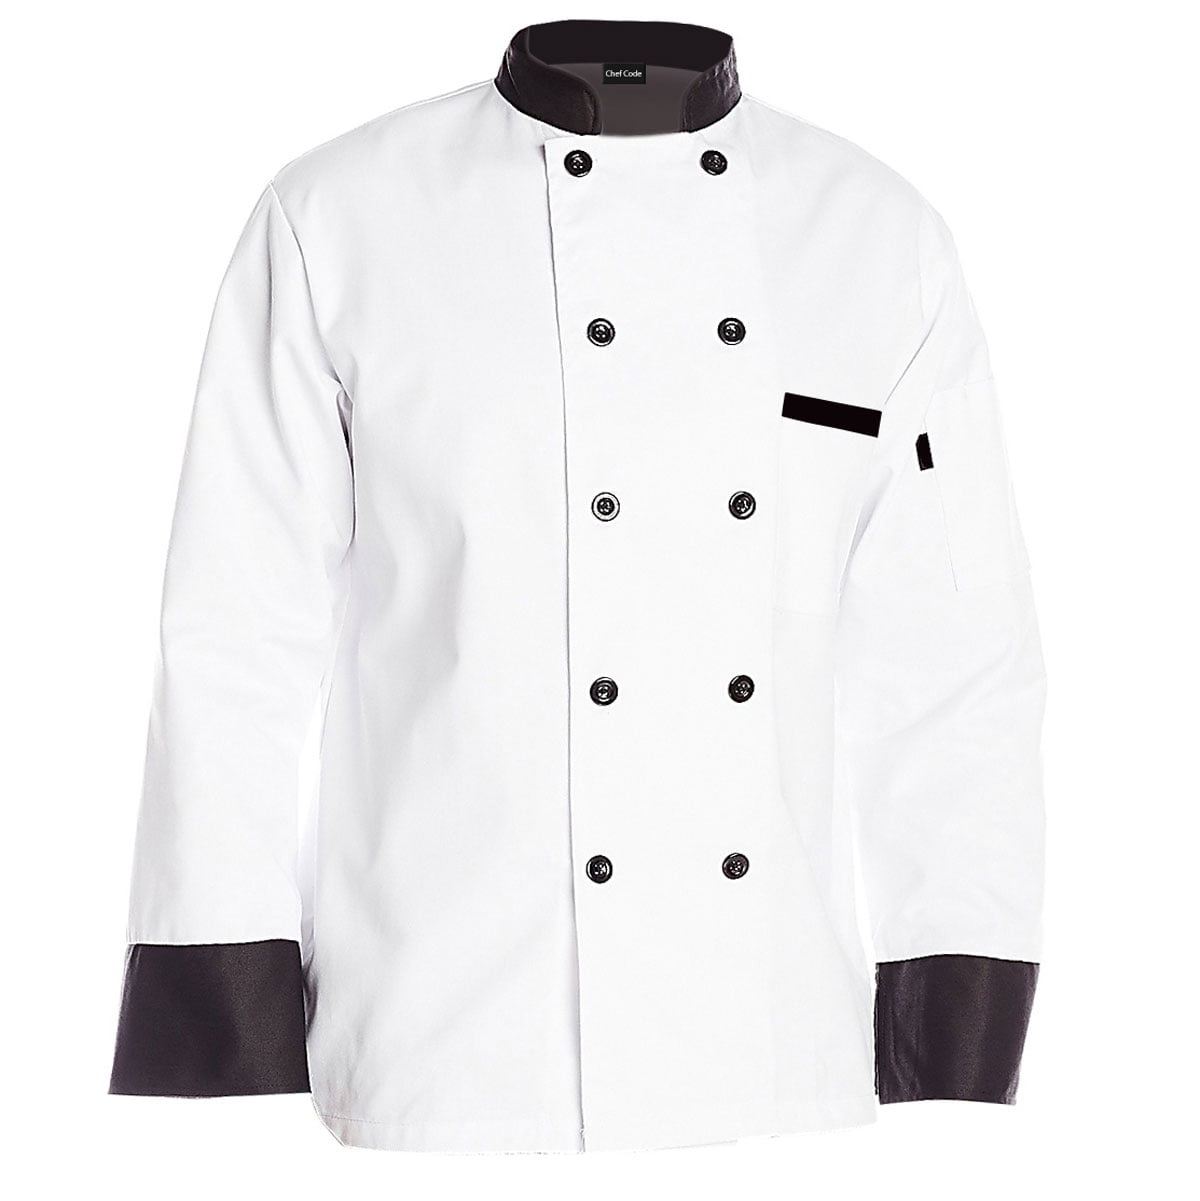 NEW MENS MASTER WHITE CHEF COAT with Black Piping Long Sleeves Size XL,4XL 